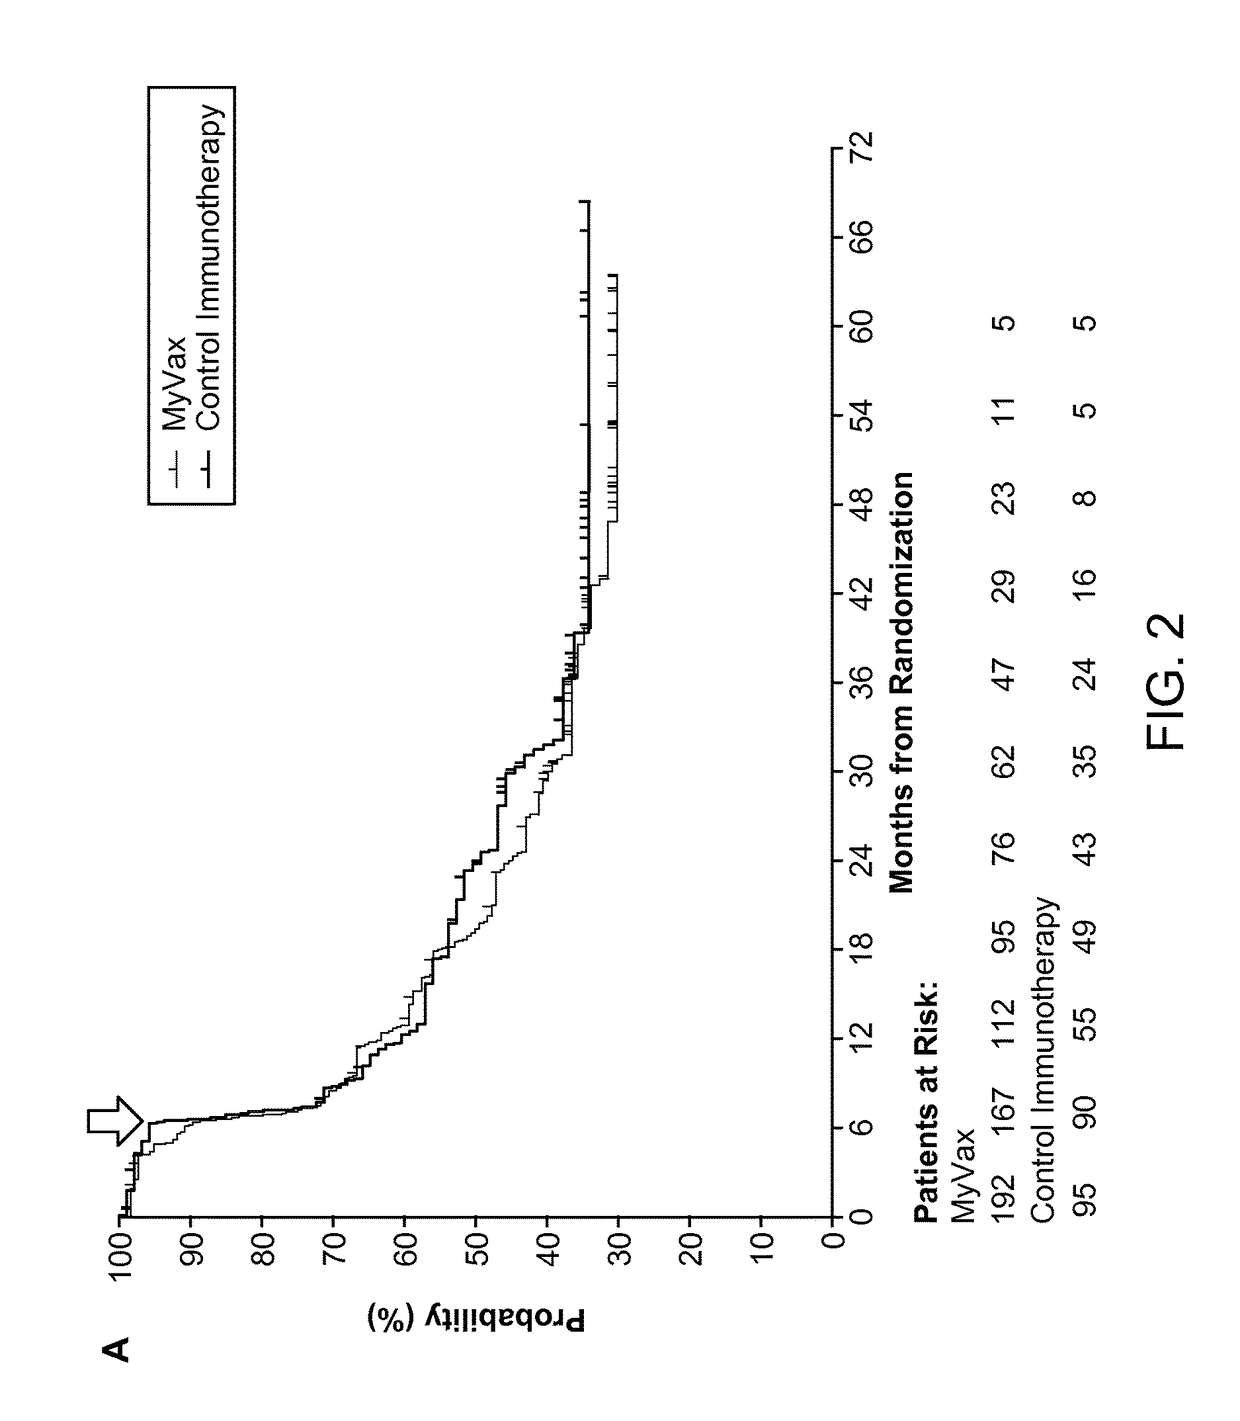 Method of predicting responsiveness of B cell lineage malignancies to active immunotherapy